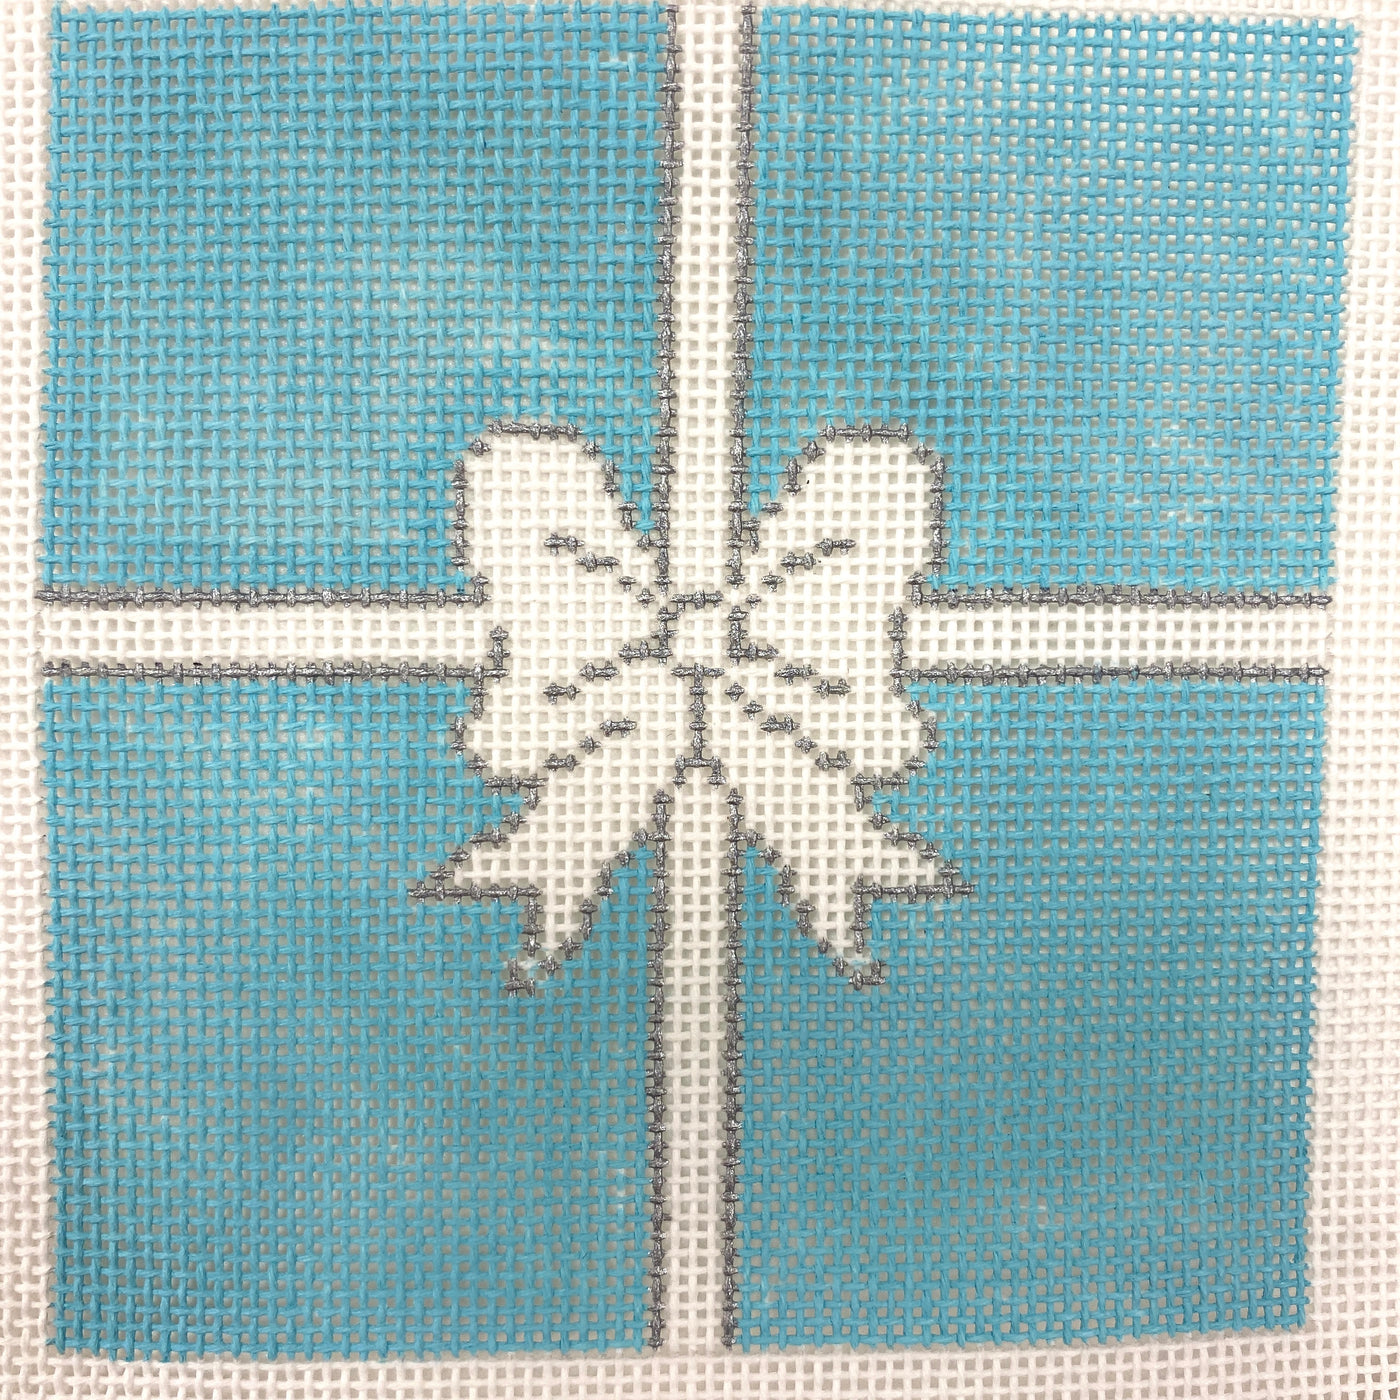 Little Blue Box with Ribbon 4" square Needlepoint Canvas